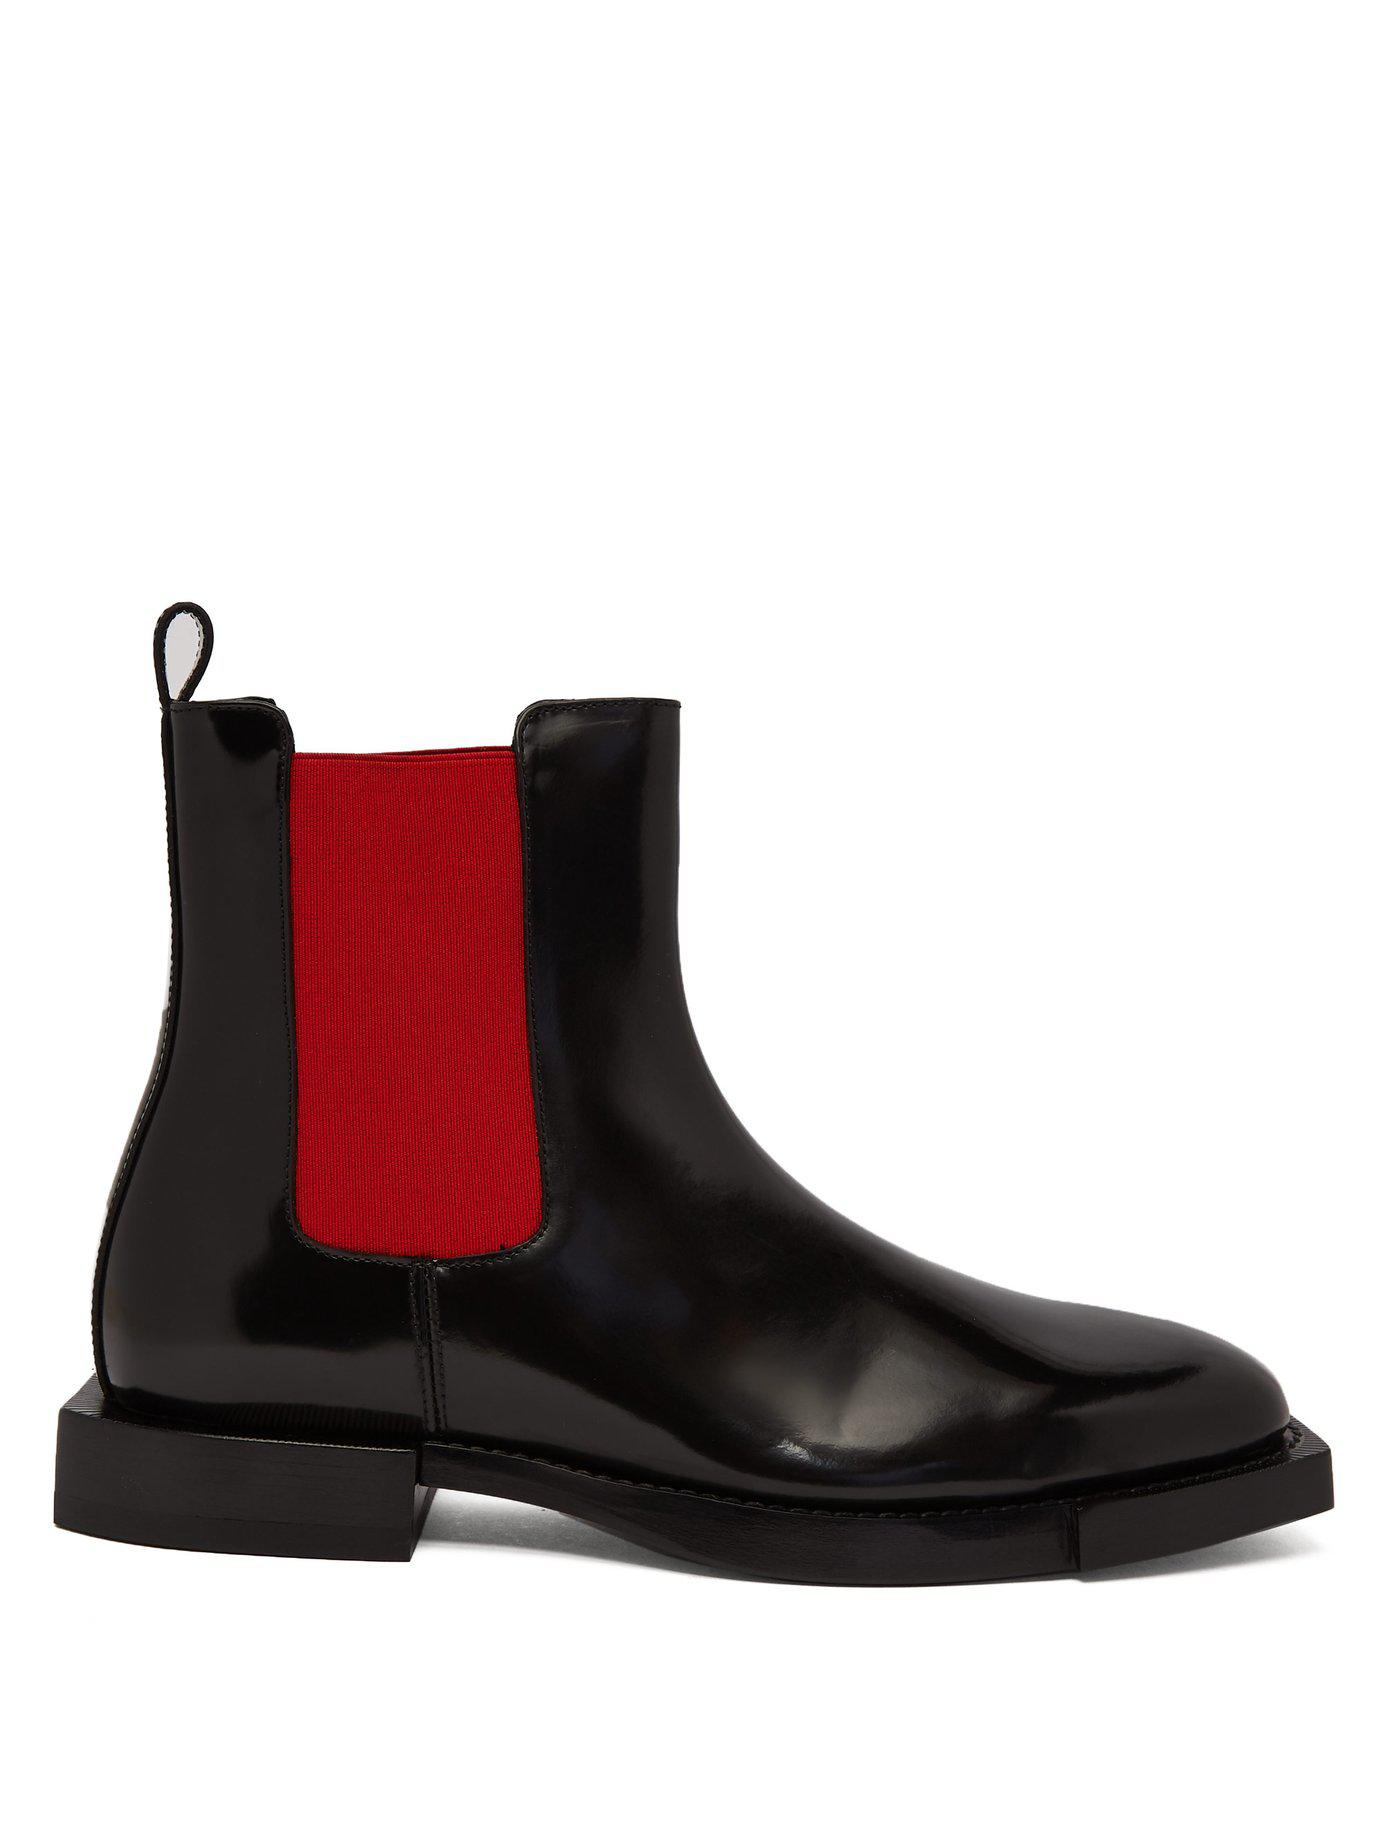 Alexander McQueen Hybrid Patent-leather Chelsea Boots in Black/Red 